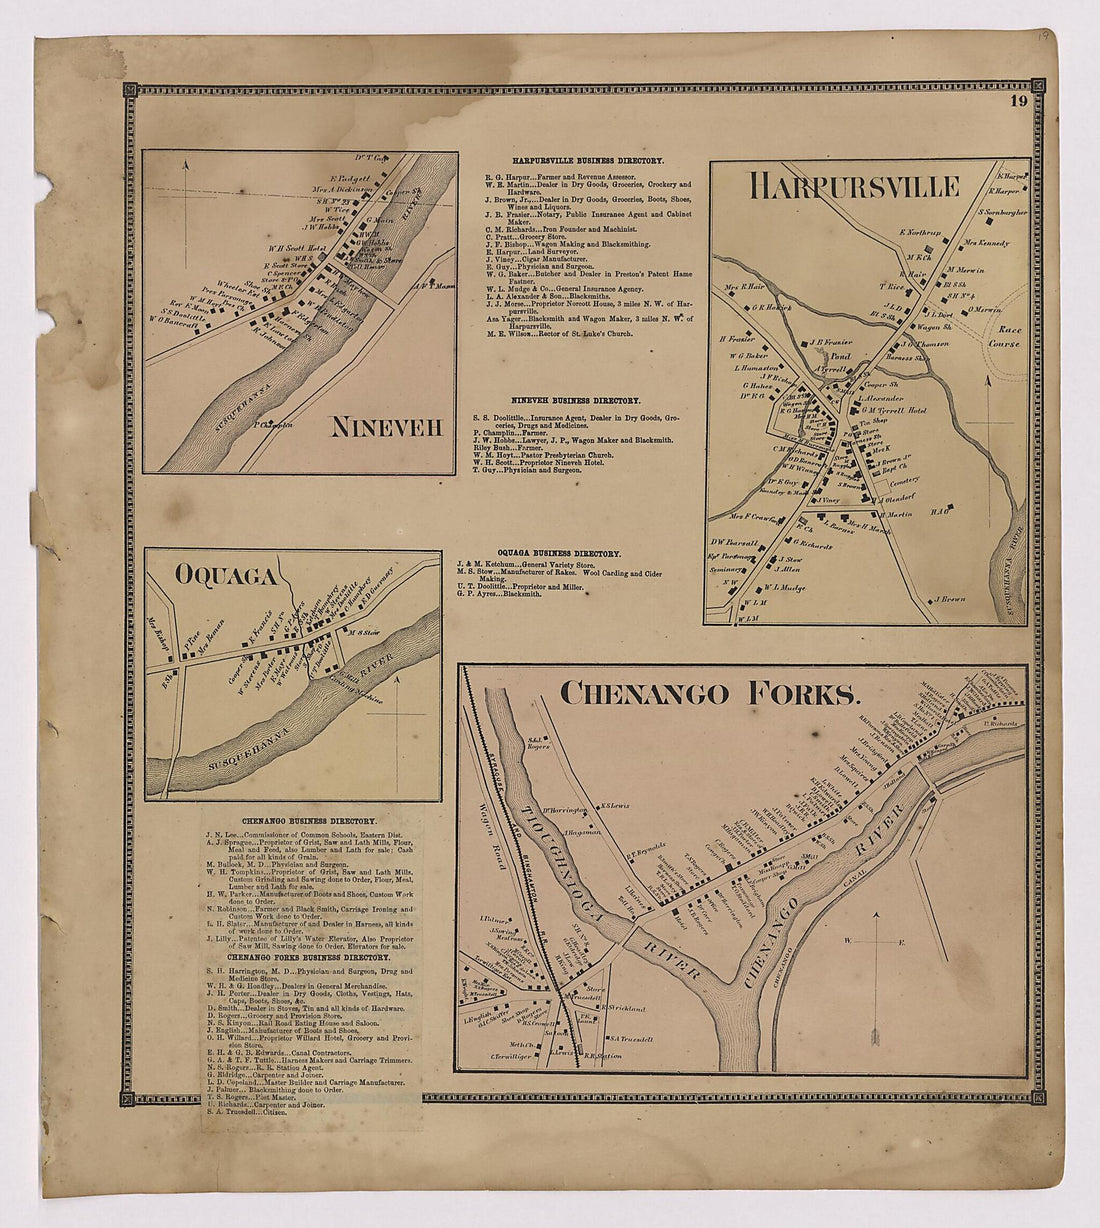 This old map of Image 11 of New Topographical Atlas of Broome County, New York from New Topographical Atlas of Broome County, New York from 1866 was created by  Stone &amp; Stewart in 1866